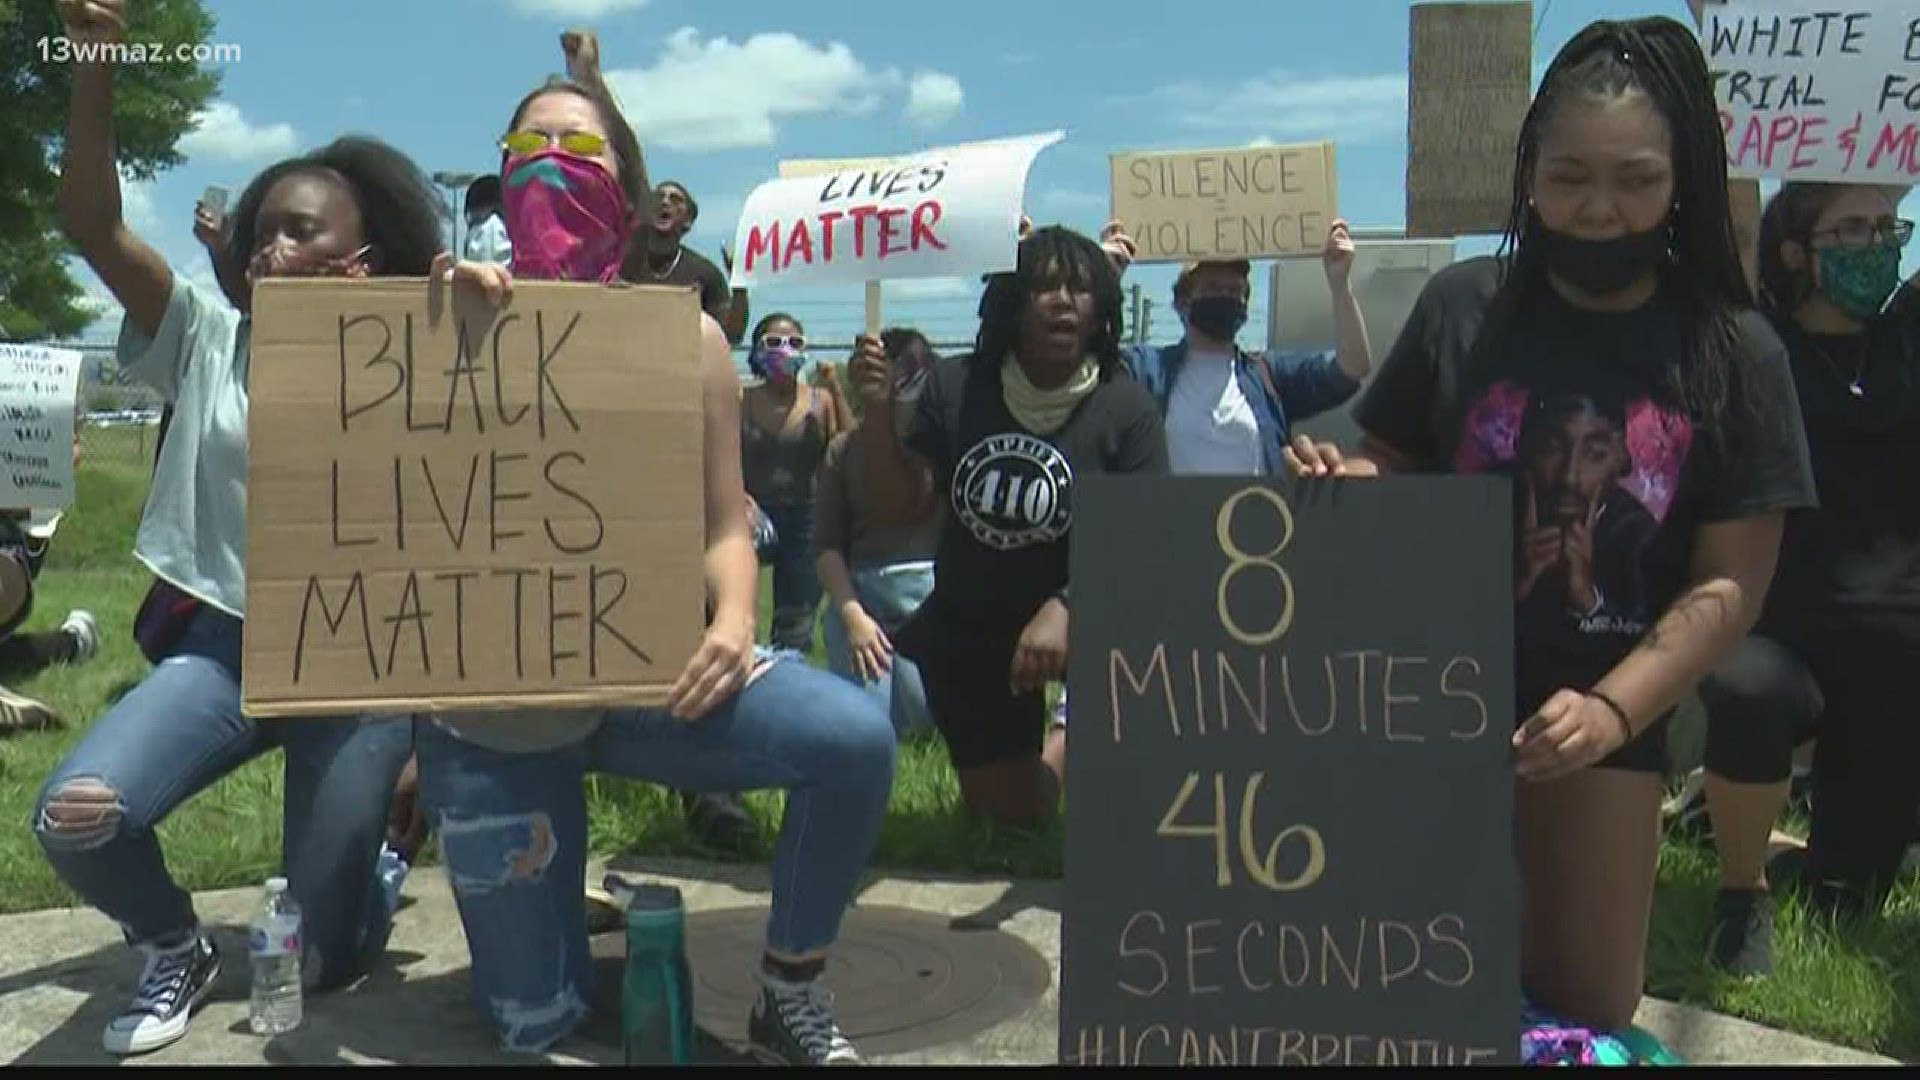 Protesters are marching all over Central Georgia against violence and injustice against African Americans, including 200 people in Warner Robins on Tuesday.